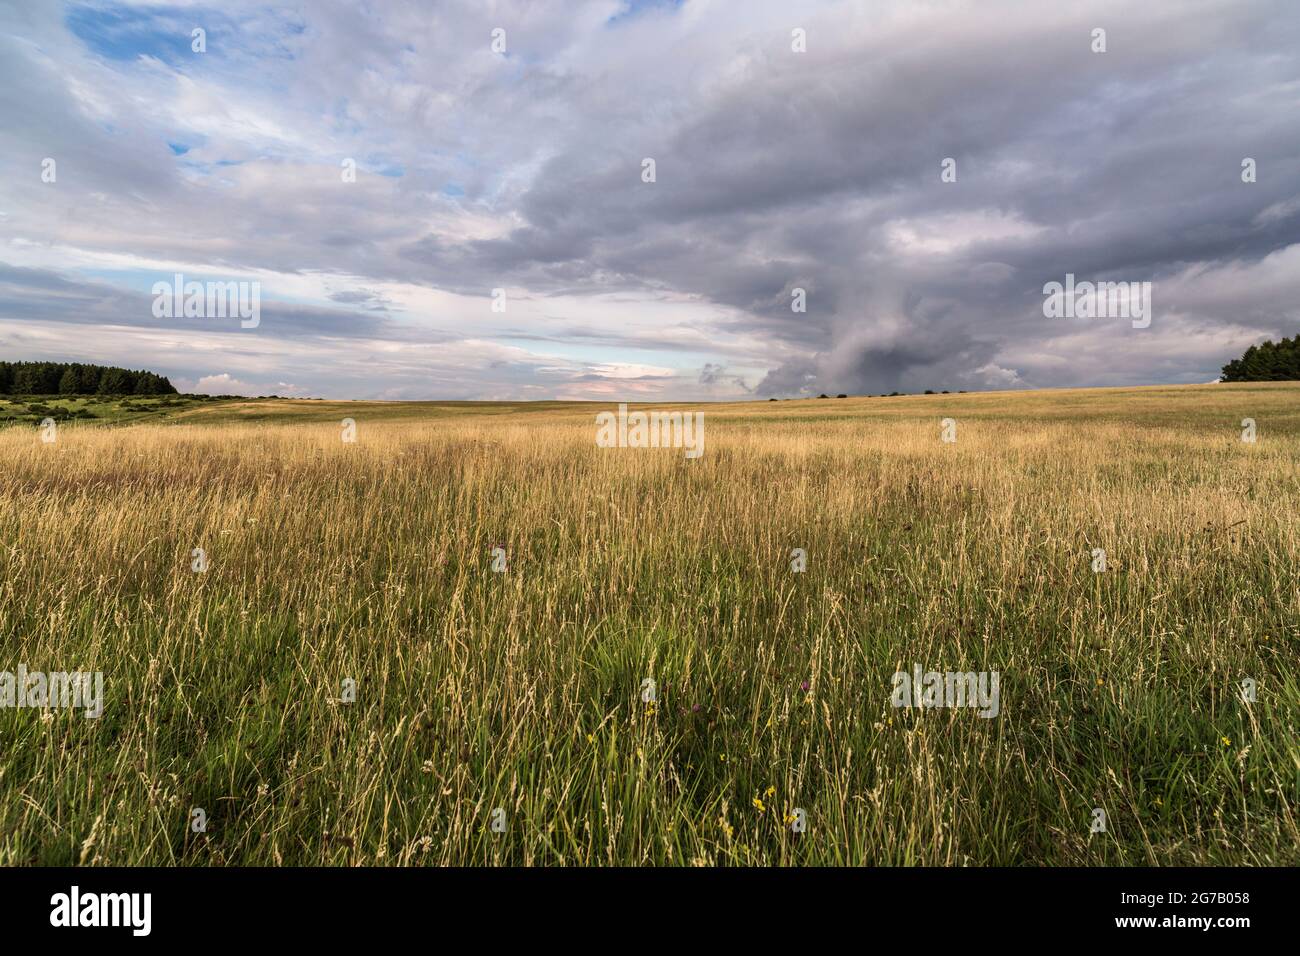 Steppe in the Eifel National Park, Germany Stock Photo